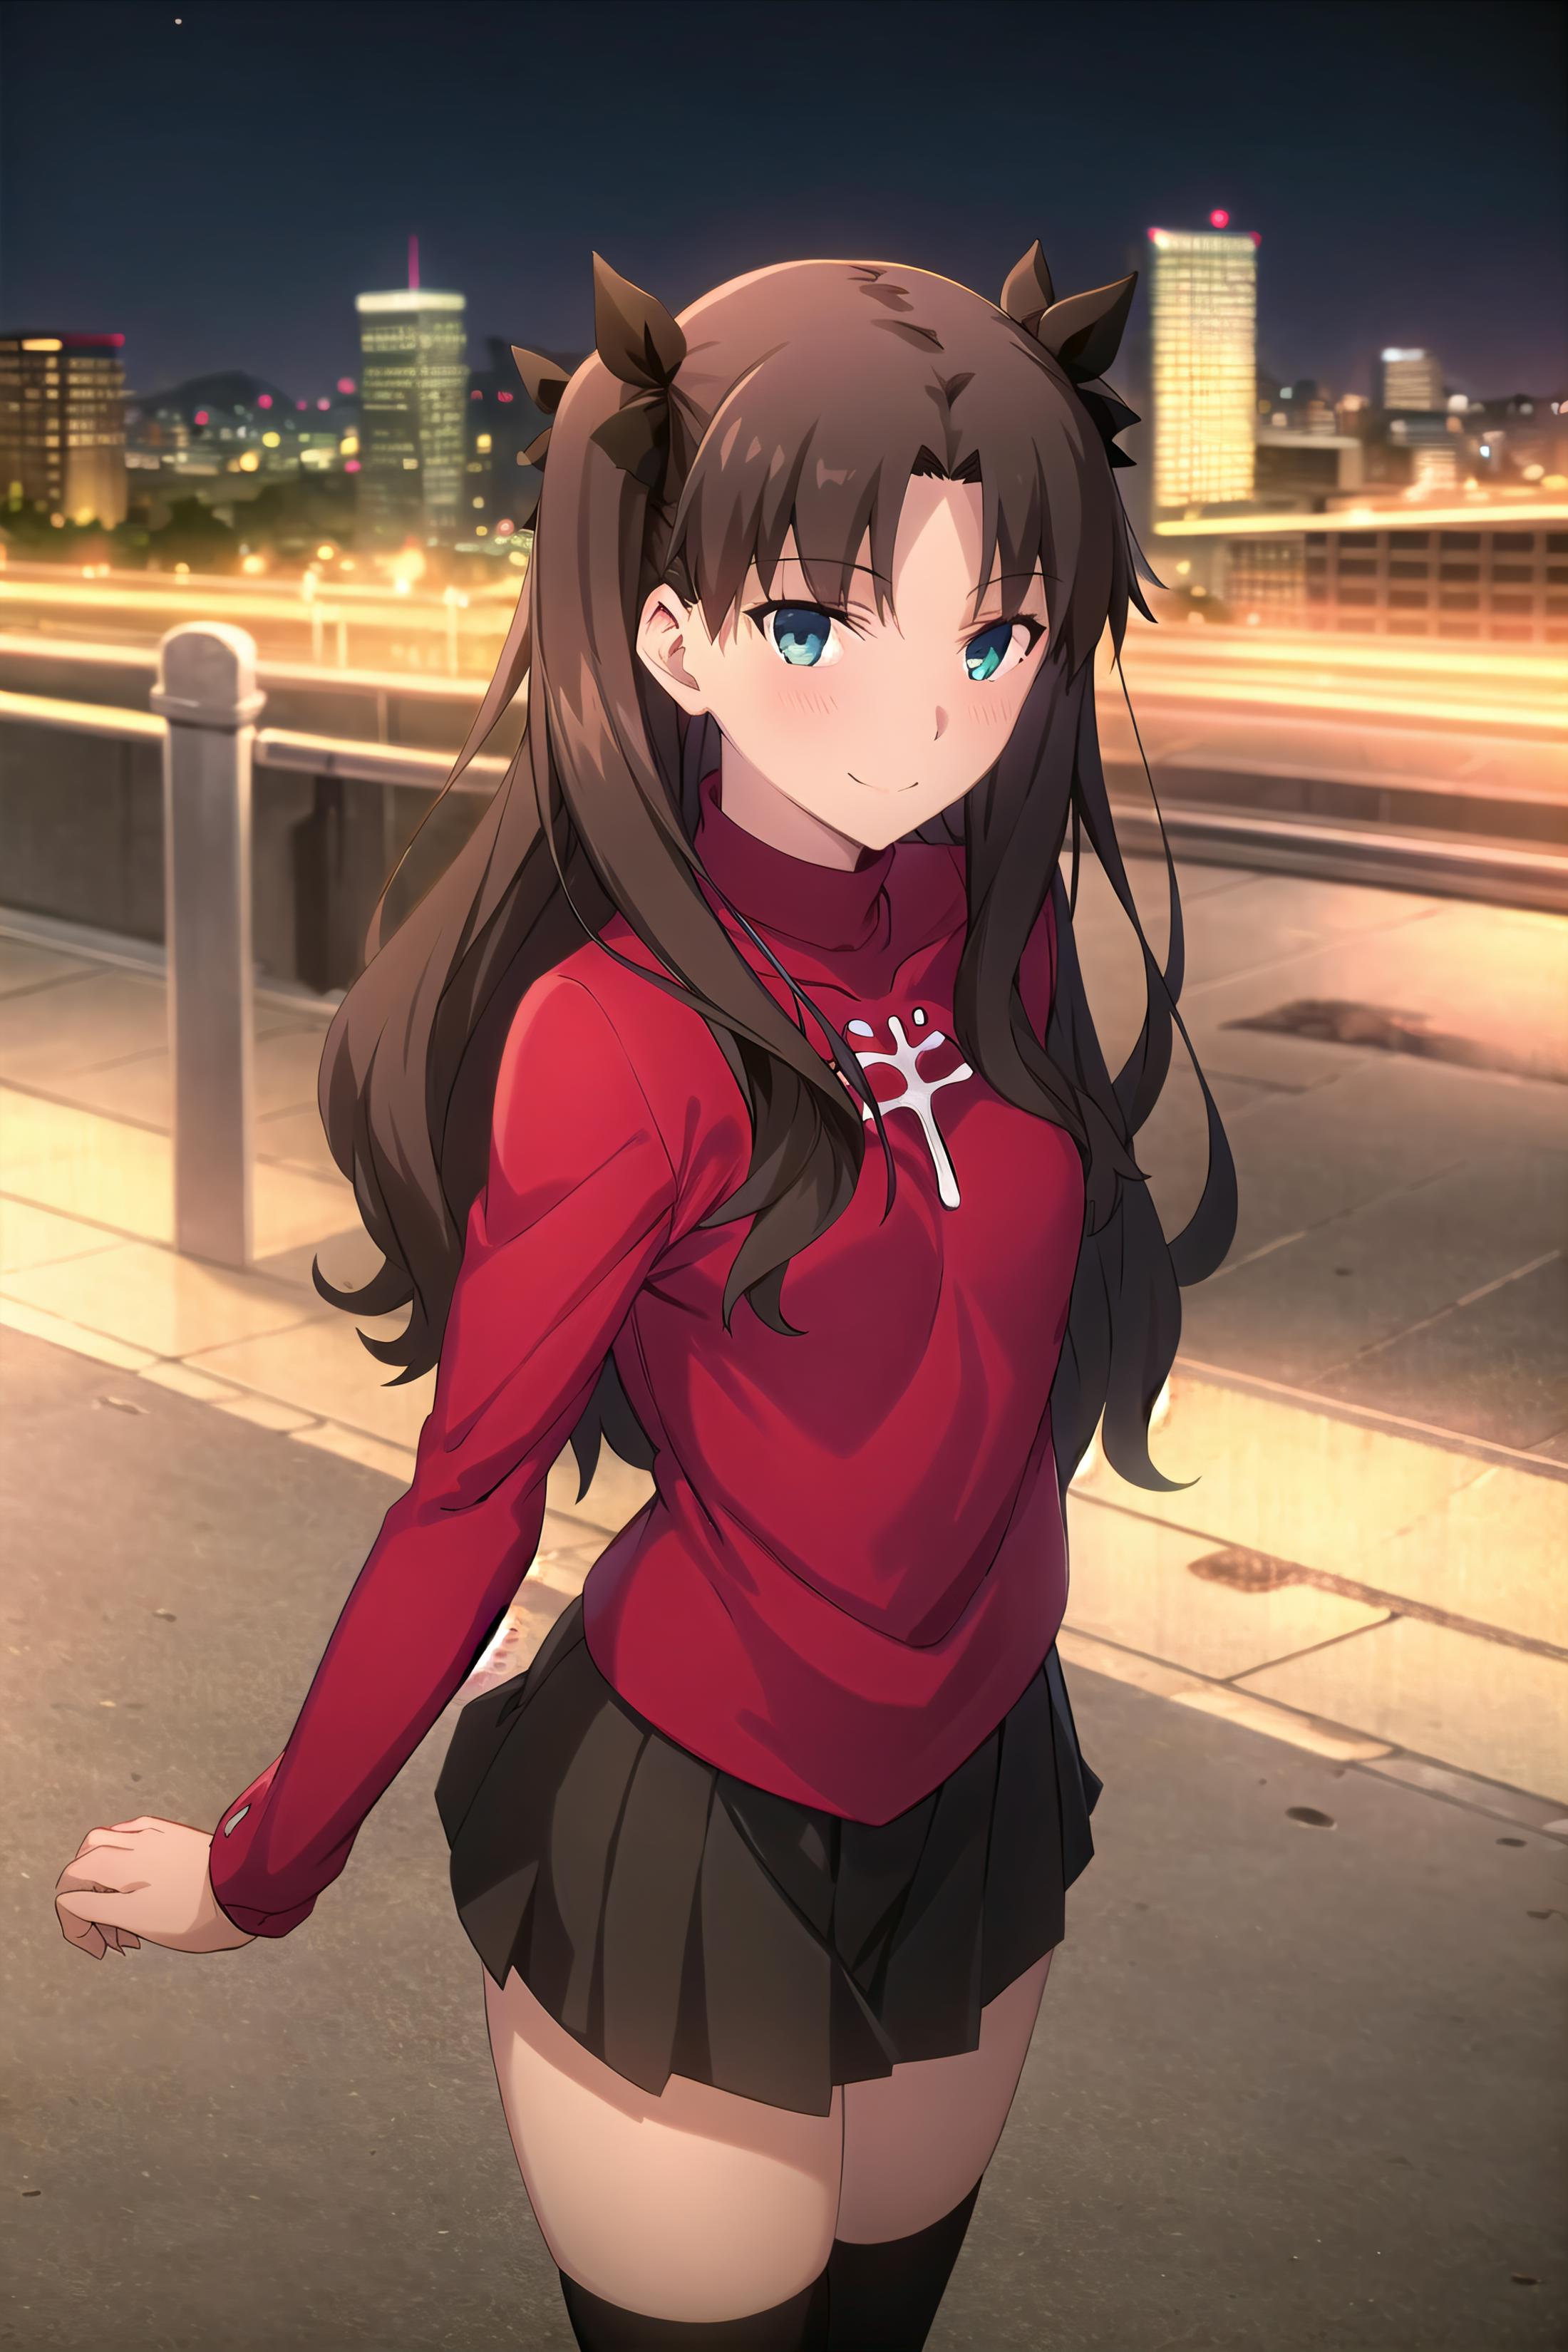 Tohsaka Rin | Fate/stay night: Unlimited Blade Works image by LittleJelly